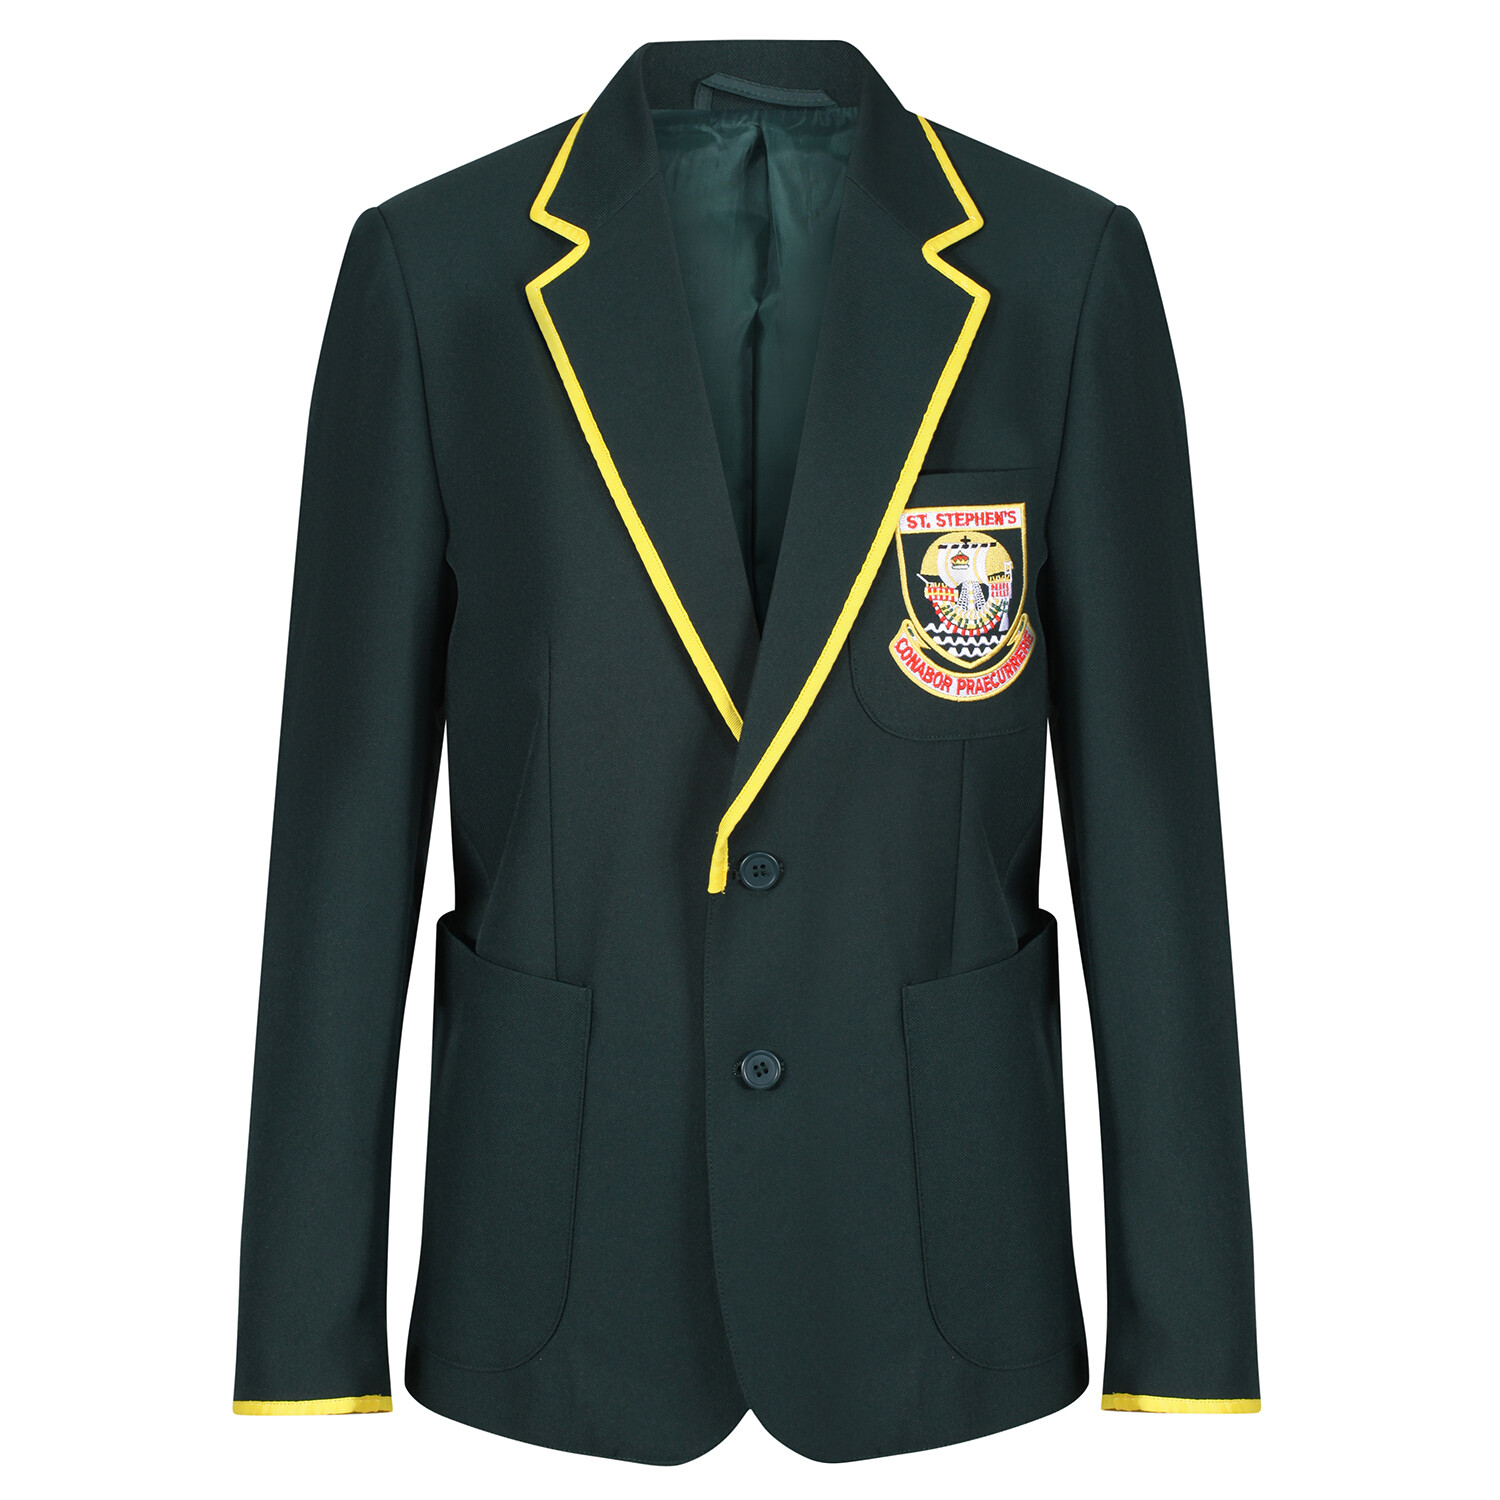 St Stephen's High Blazer (S5-S6) with Gold Taping